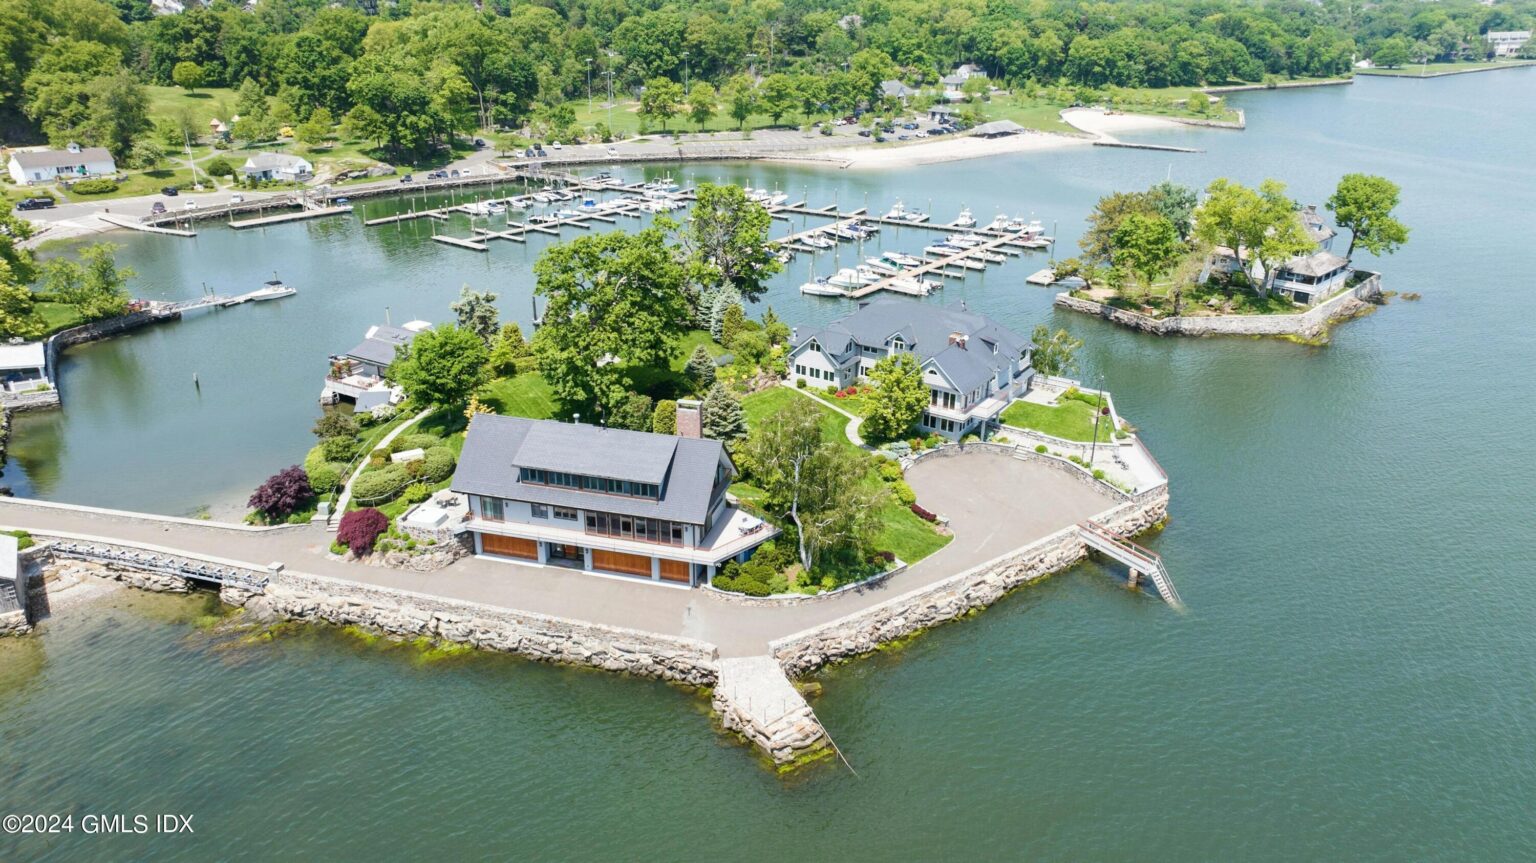 A luxurious private island home in Greenwich, Connecticut, is on the market for £19.6m ($25m). The 7-bedroom mansion sits on 1.1 acres, featuring a guesthouse, private beach, and dock.